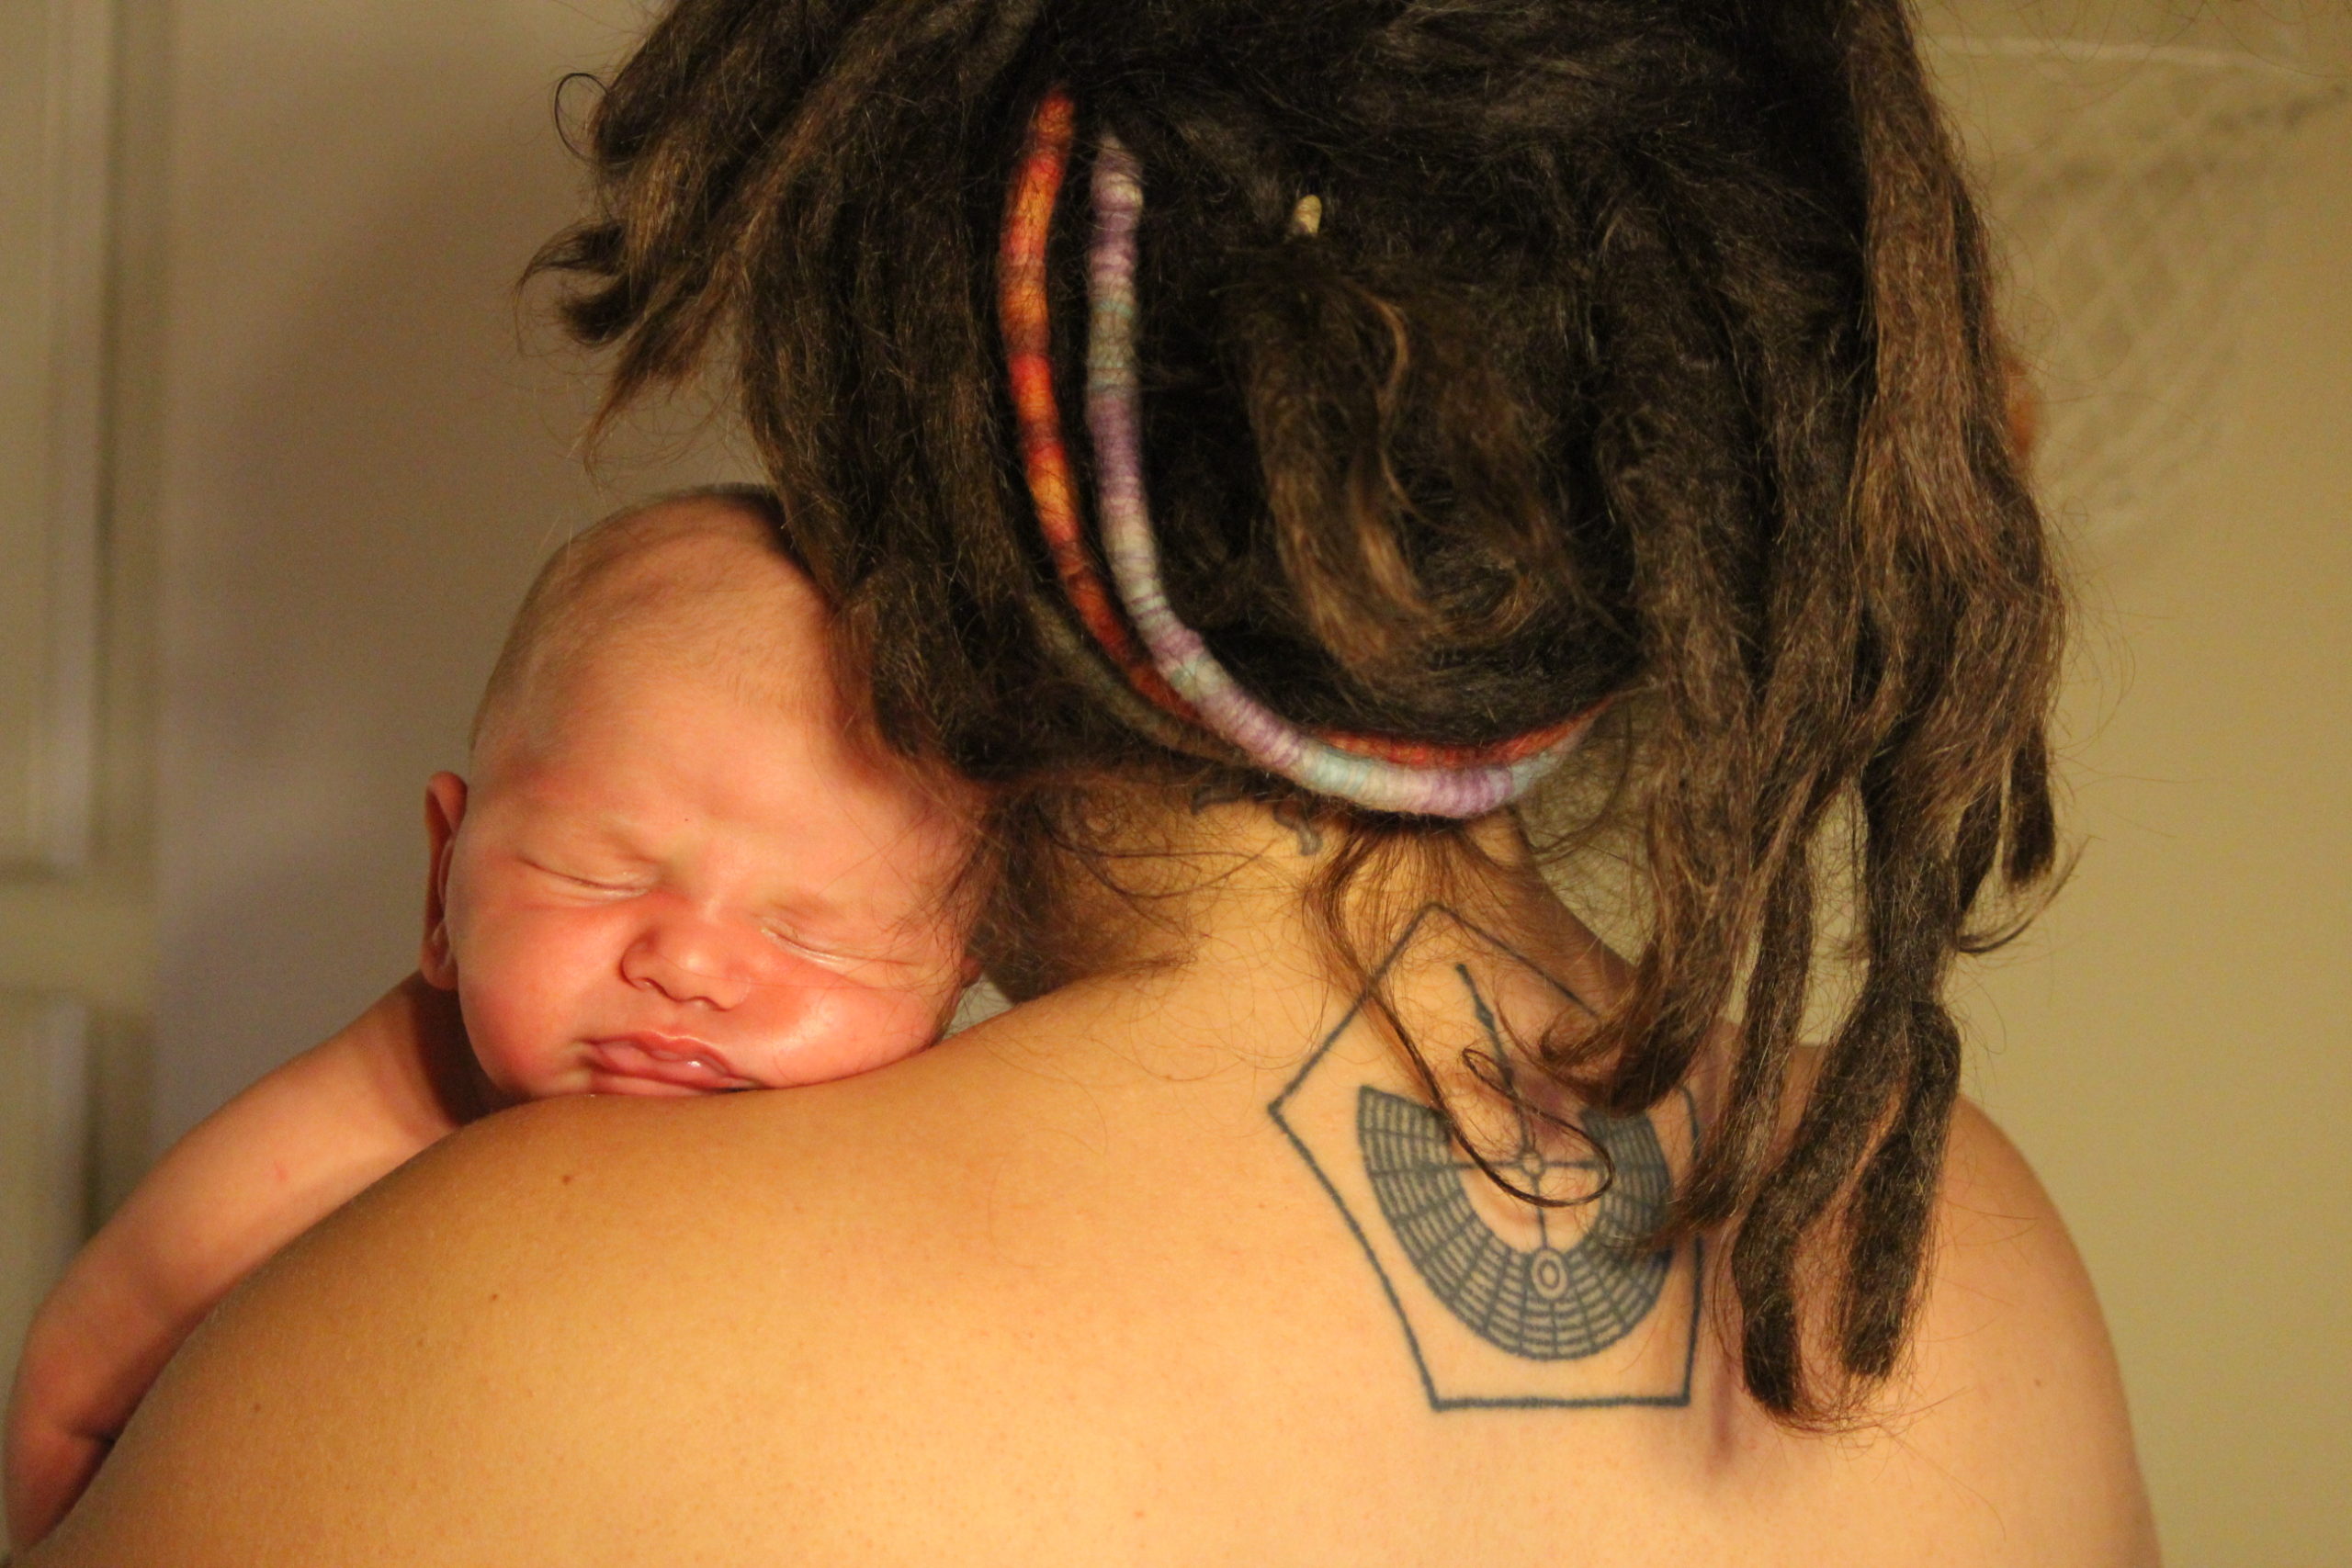 Woman with dreadlocks and Burning Man tattoo holds a newborn baby